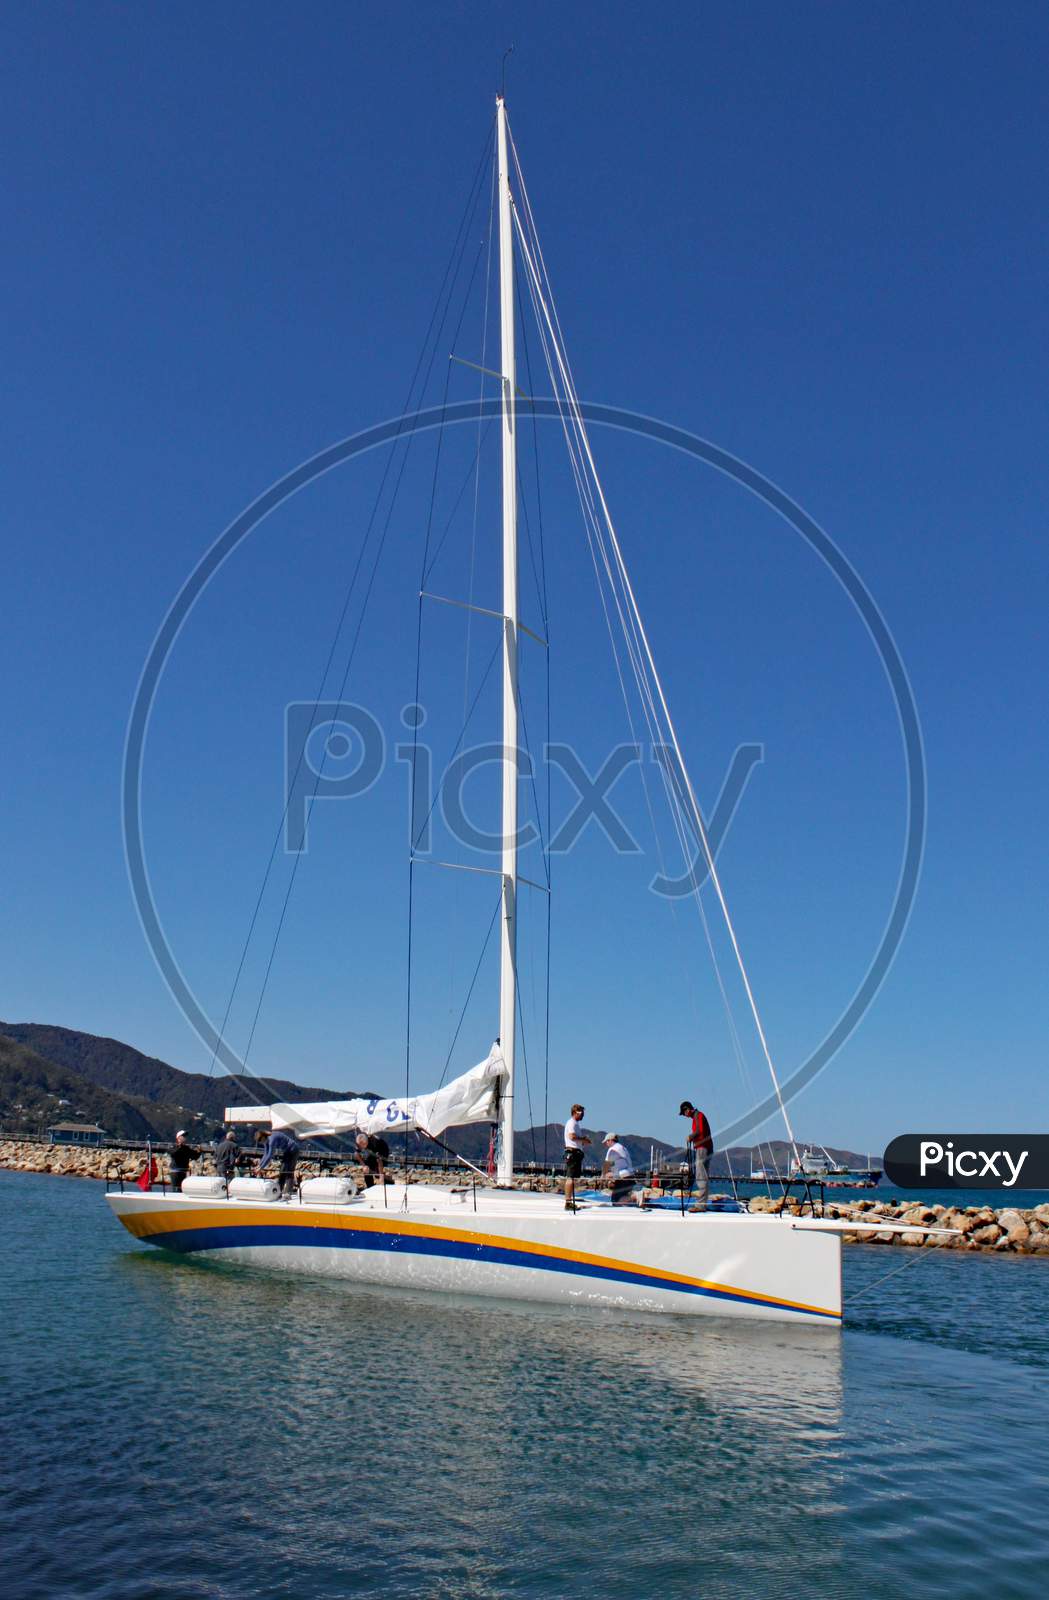 Newly Built Racing Yacht Oystercatcher Prepares To Leave It'S Wellington Harbour En Route To Tauranga For Shipping To The United States.